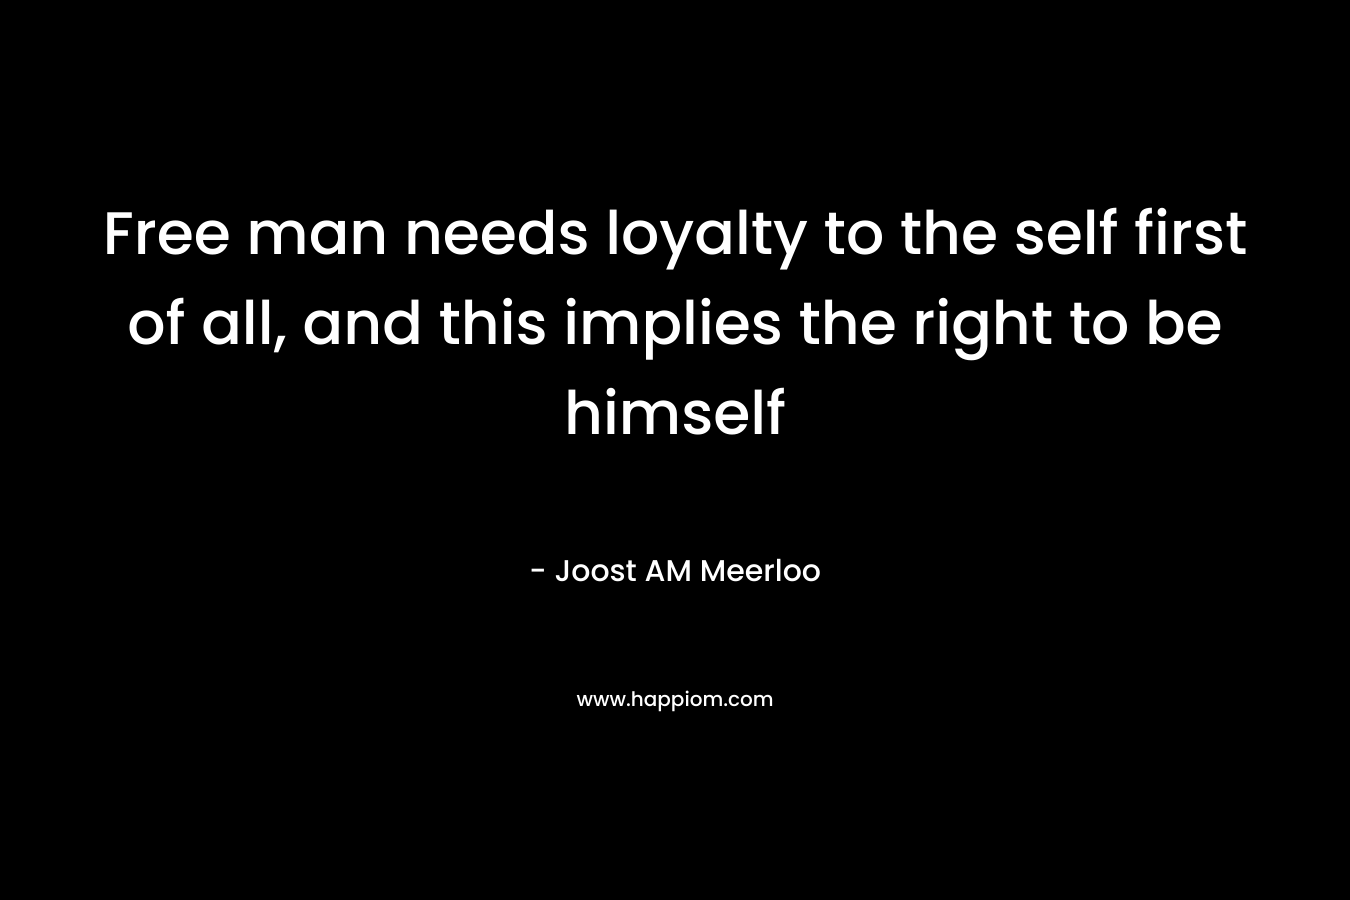 Free man needs loyalty to the self first of all, and this implies the right to be himself – Joost AM Meerloo